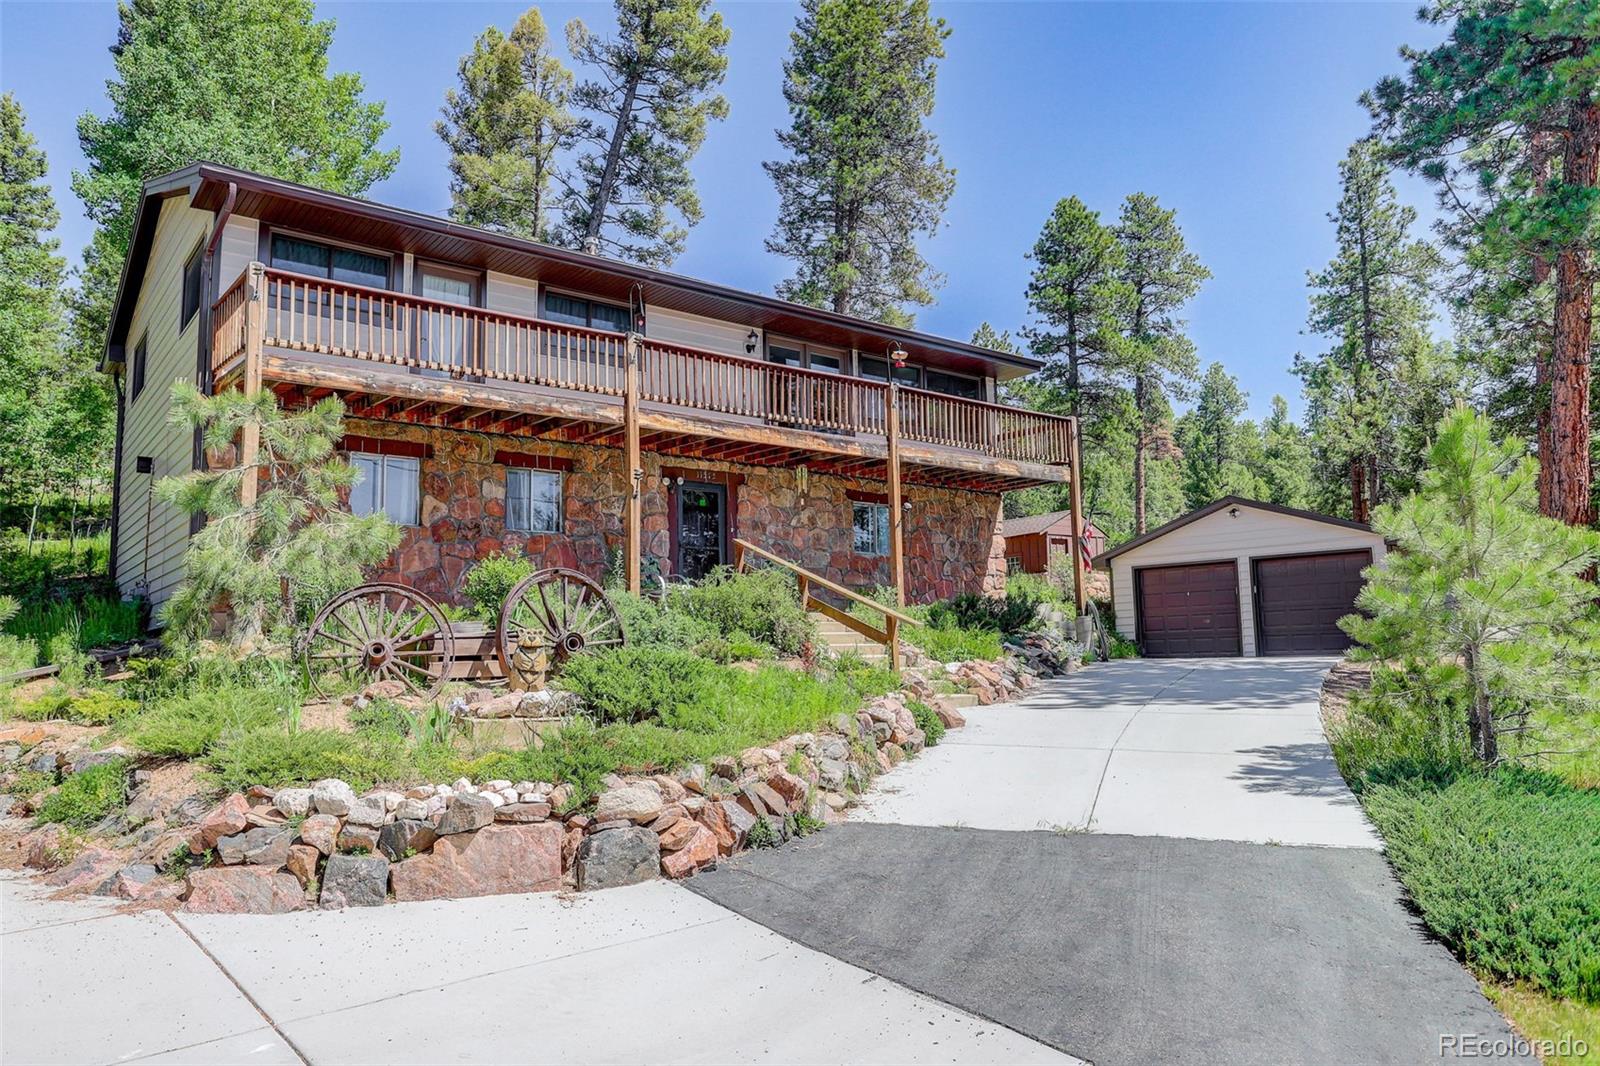 11575 s us highway 285 frontage road, conifer sold home. Closed on 2023-12-20 for $580,000.